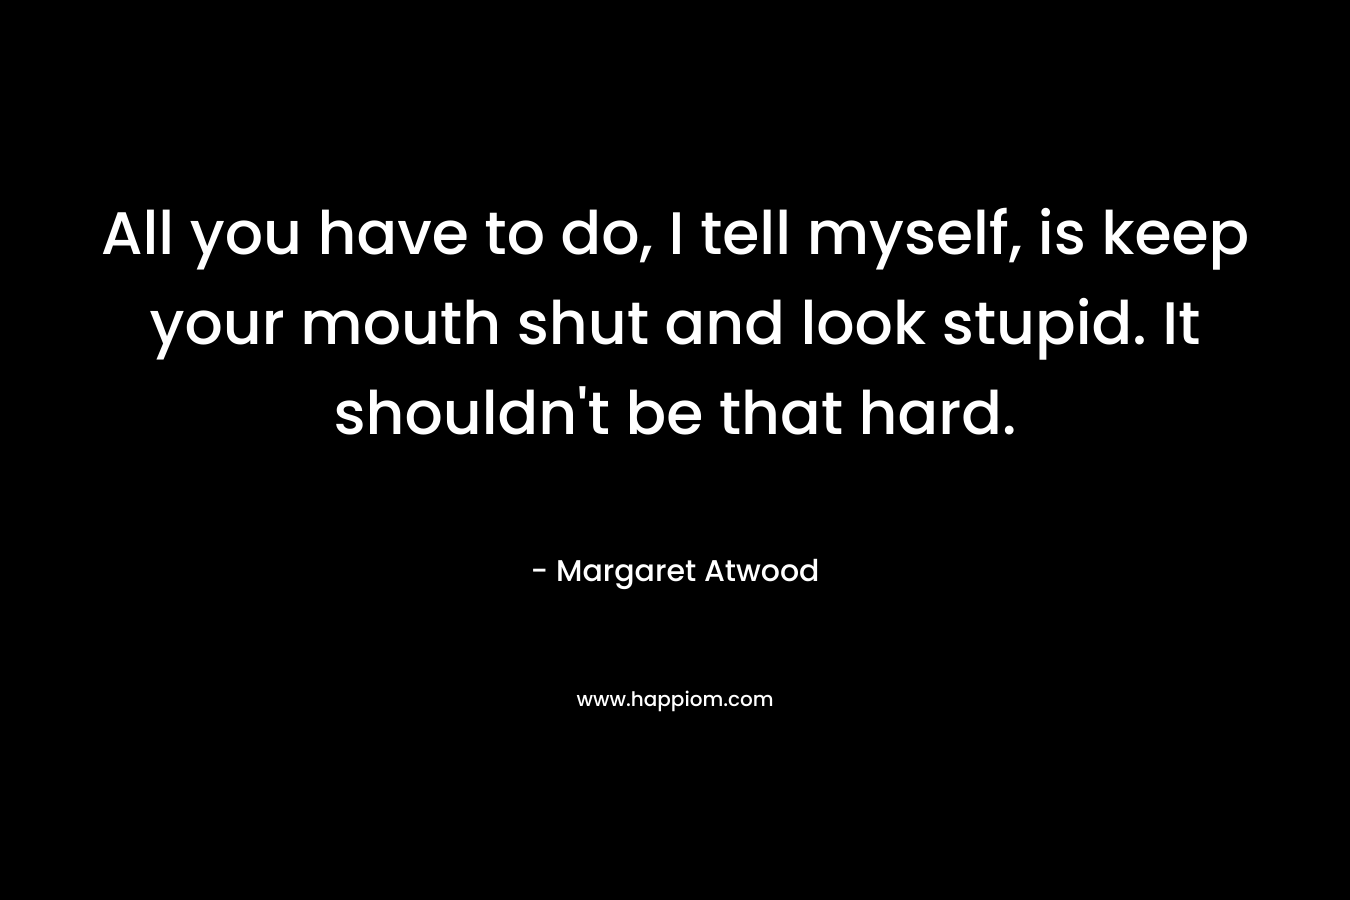 All you have to do, I tell myself, is keep your mouth shut and look stupid. It shouldn't be that hard.